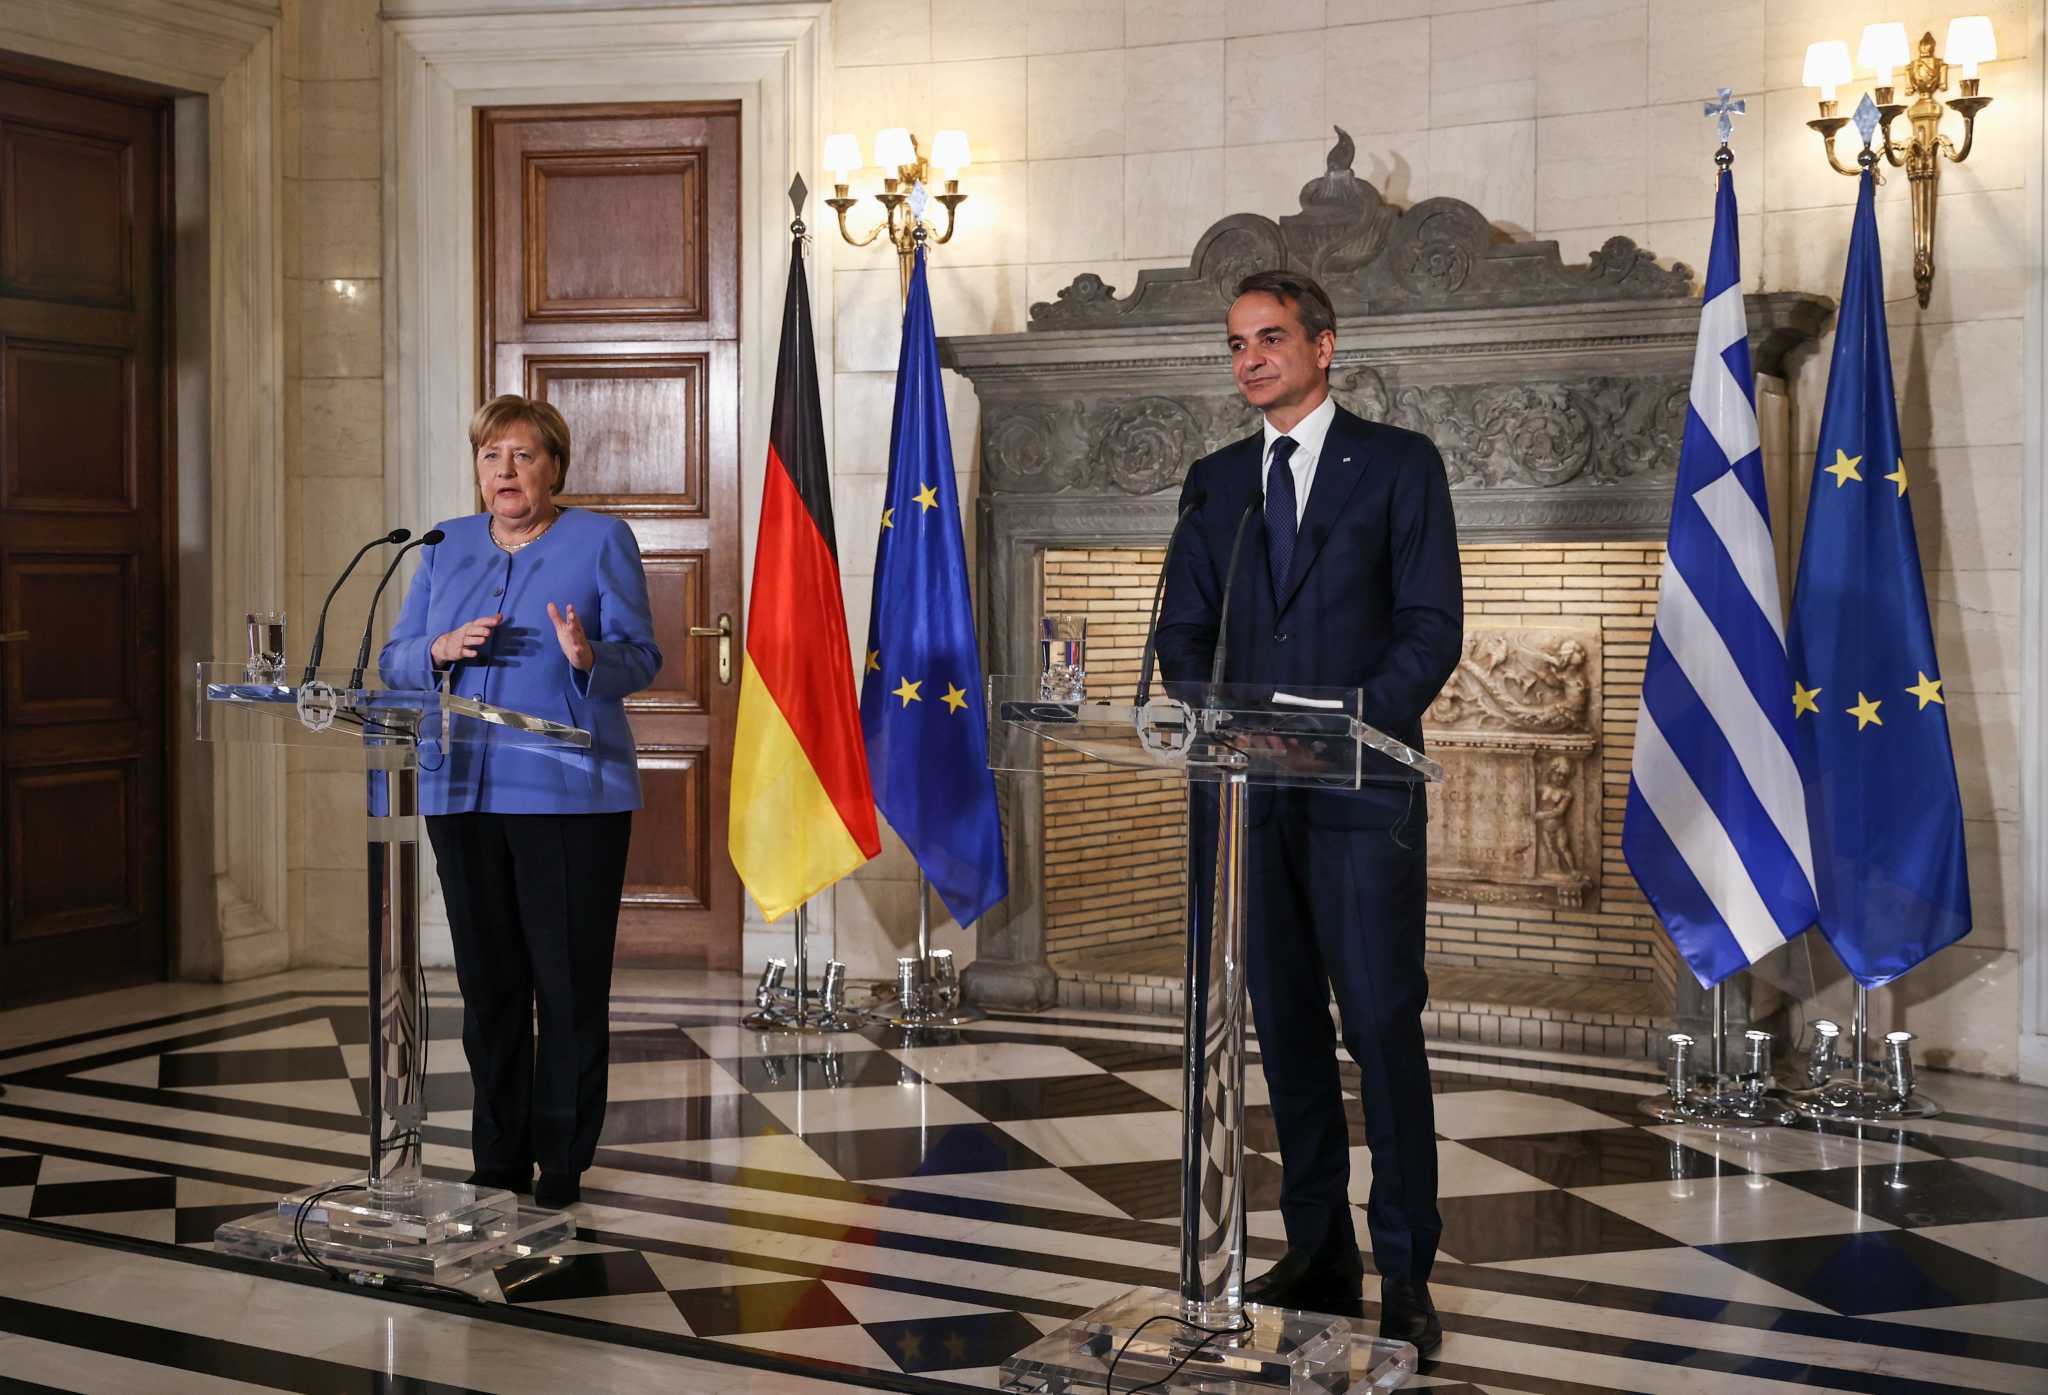 Merkel says she 'demanded much of the Greeks' but it was necessary to protect the common currency